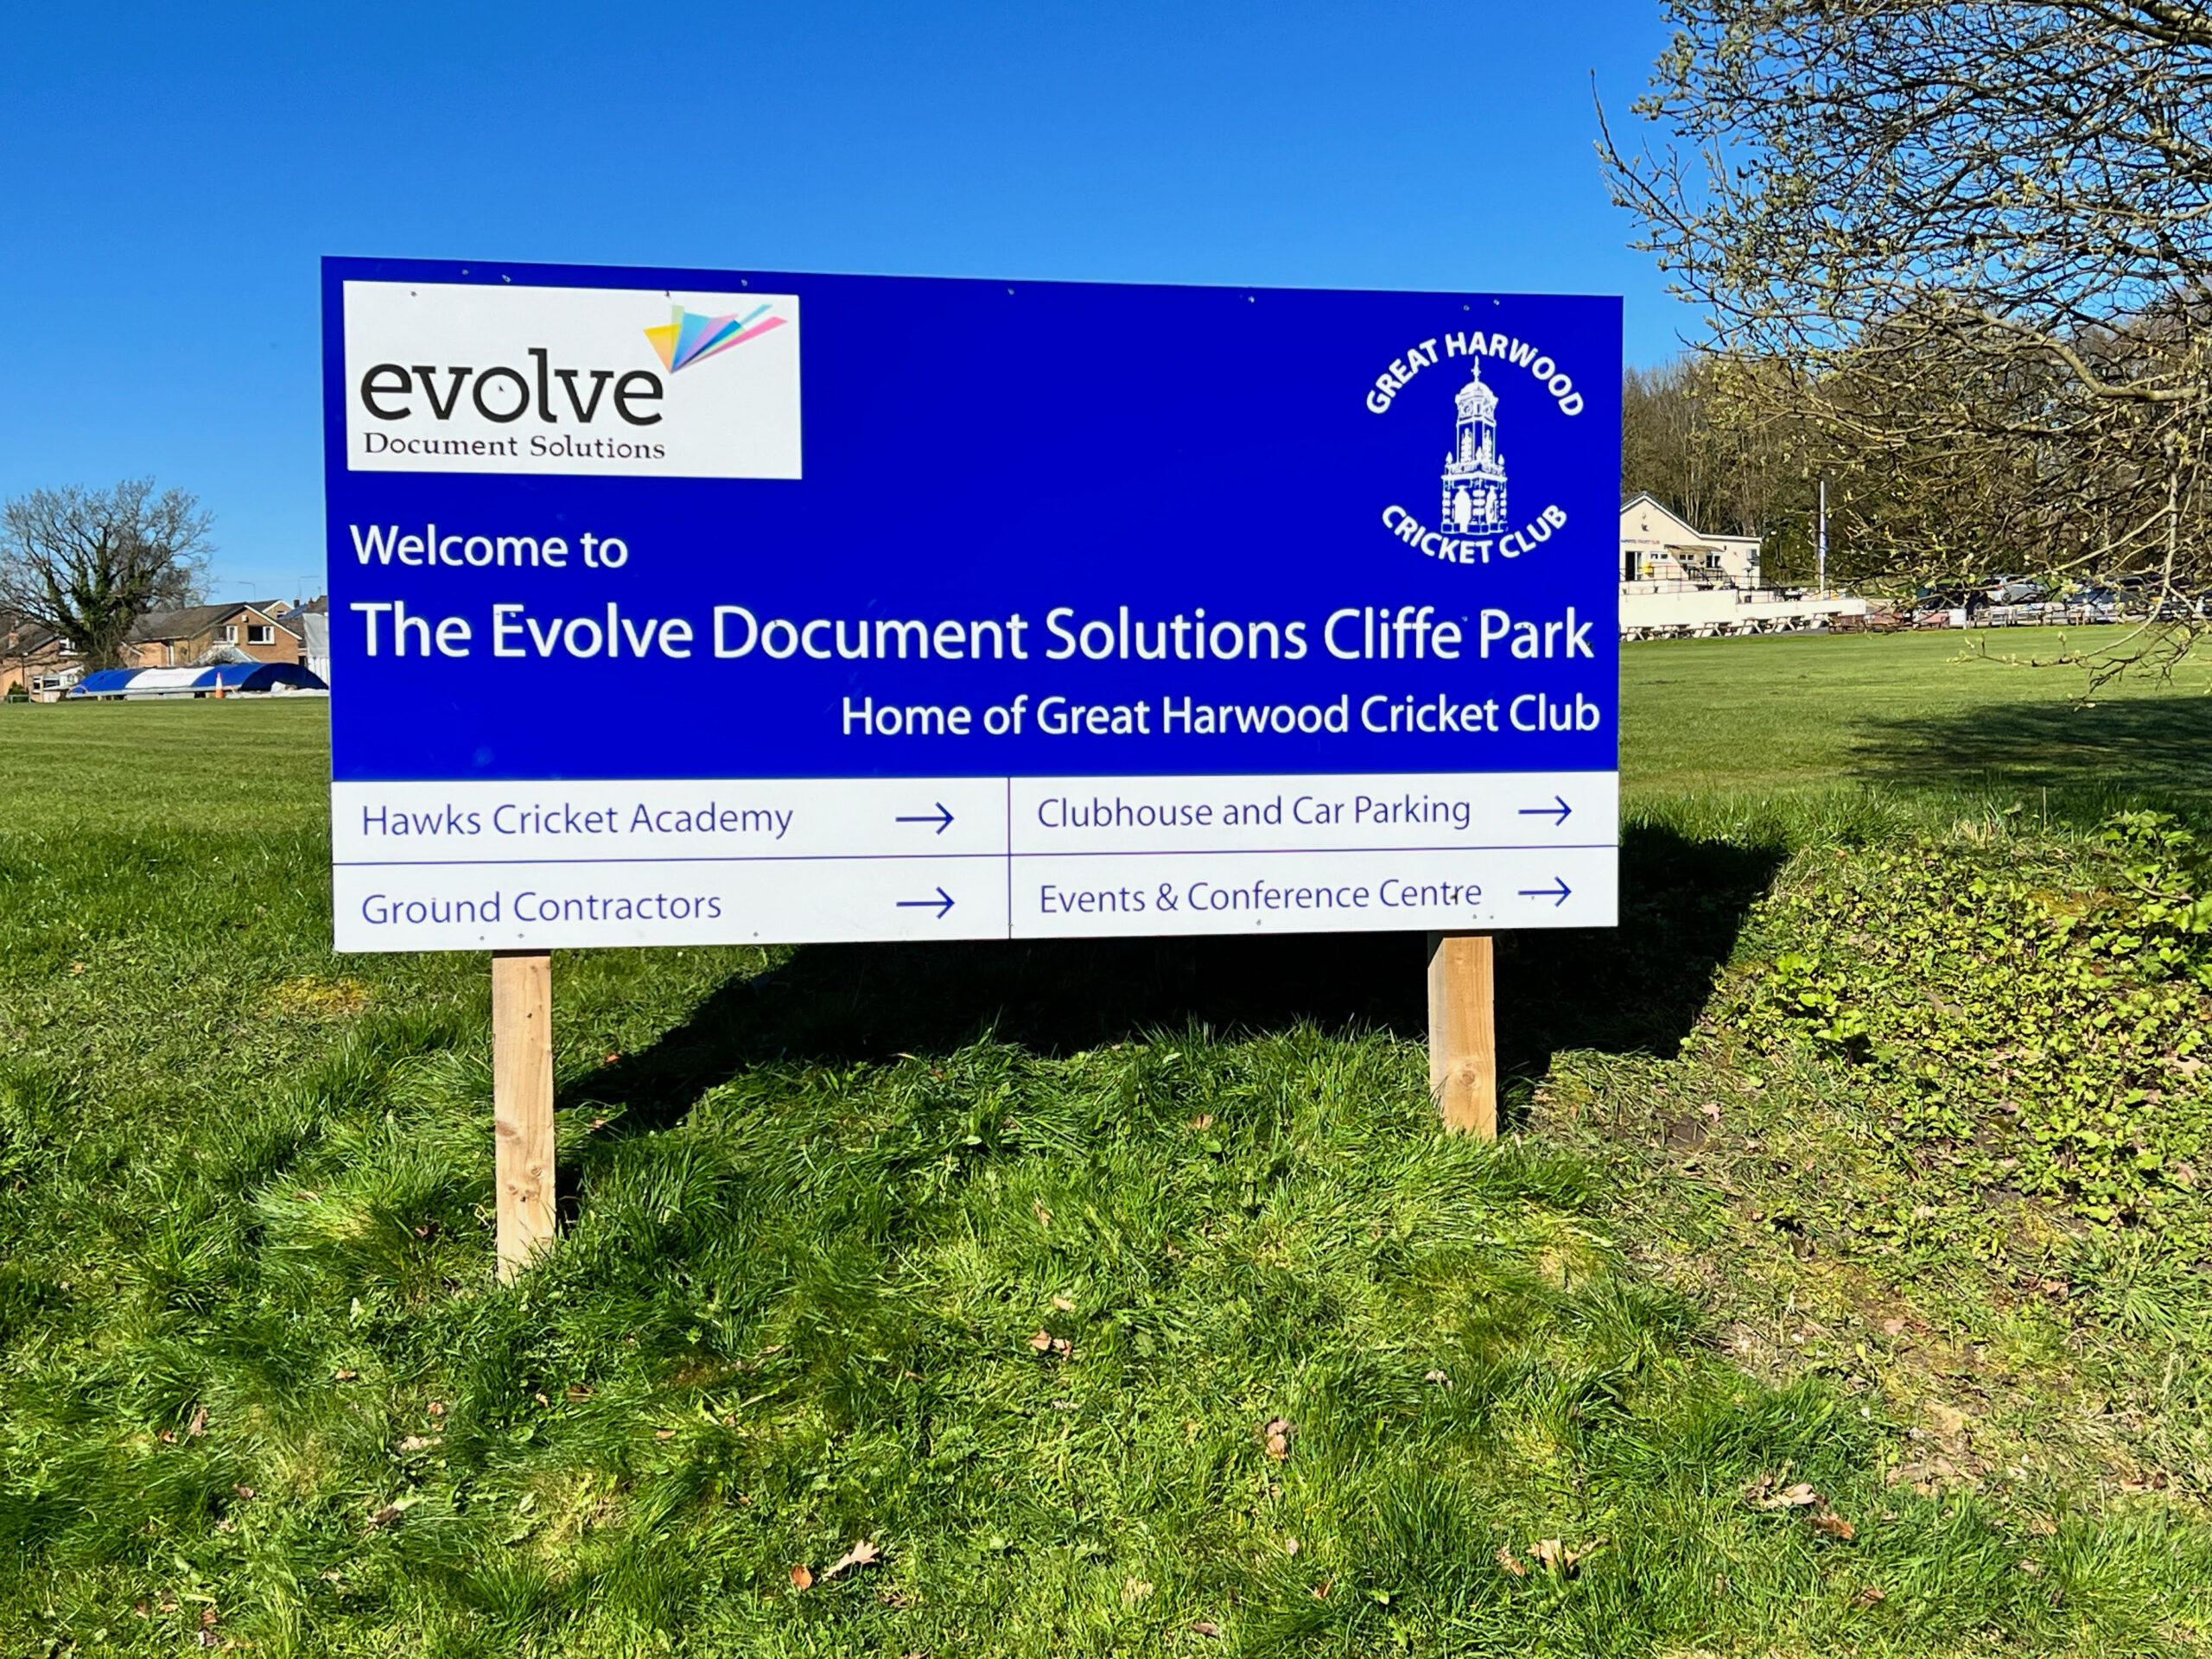 Evolve Document Solutions and Great Harwood Cricket Club have confirmed the extension of their ground naming rights deal for another year.